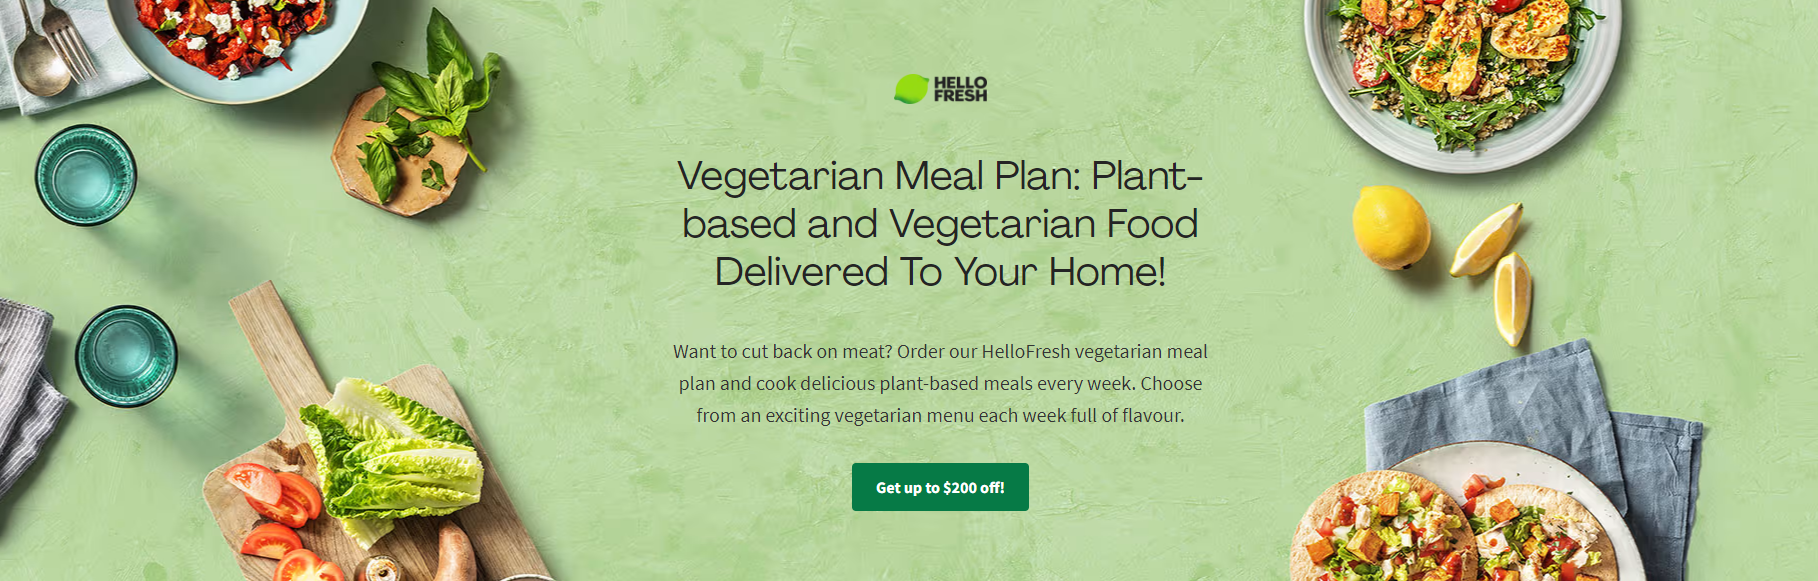 Get Up To $200 off or 40% OFF on your HelloFresh Vegan order with promo code